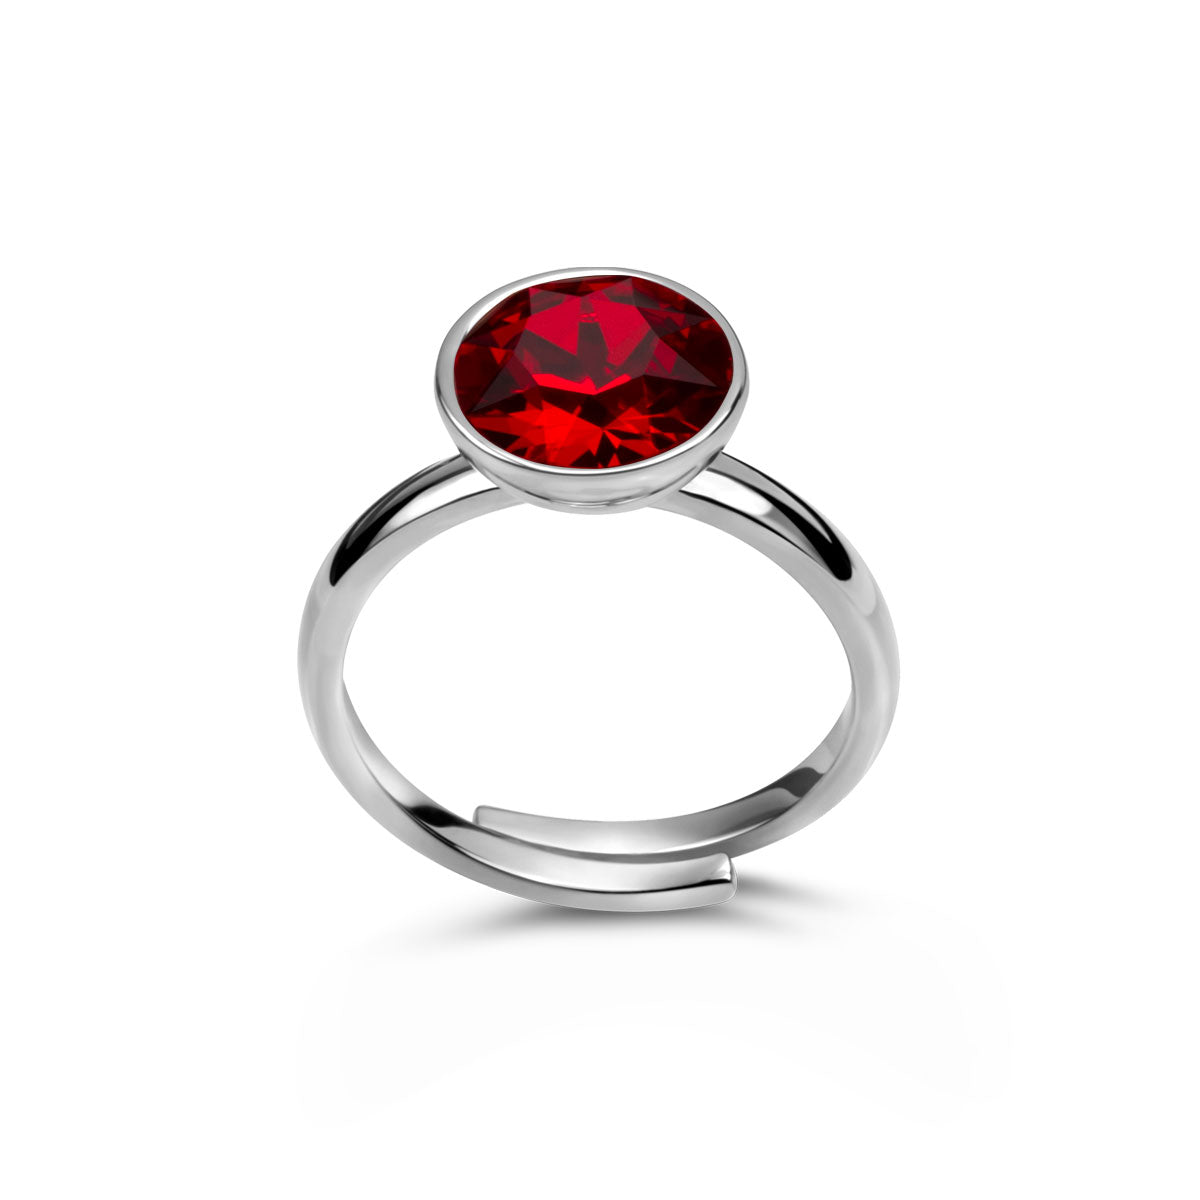 Ring 925 Silber roter Stein#oberflache_silber